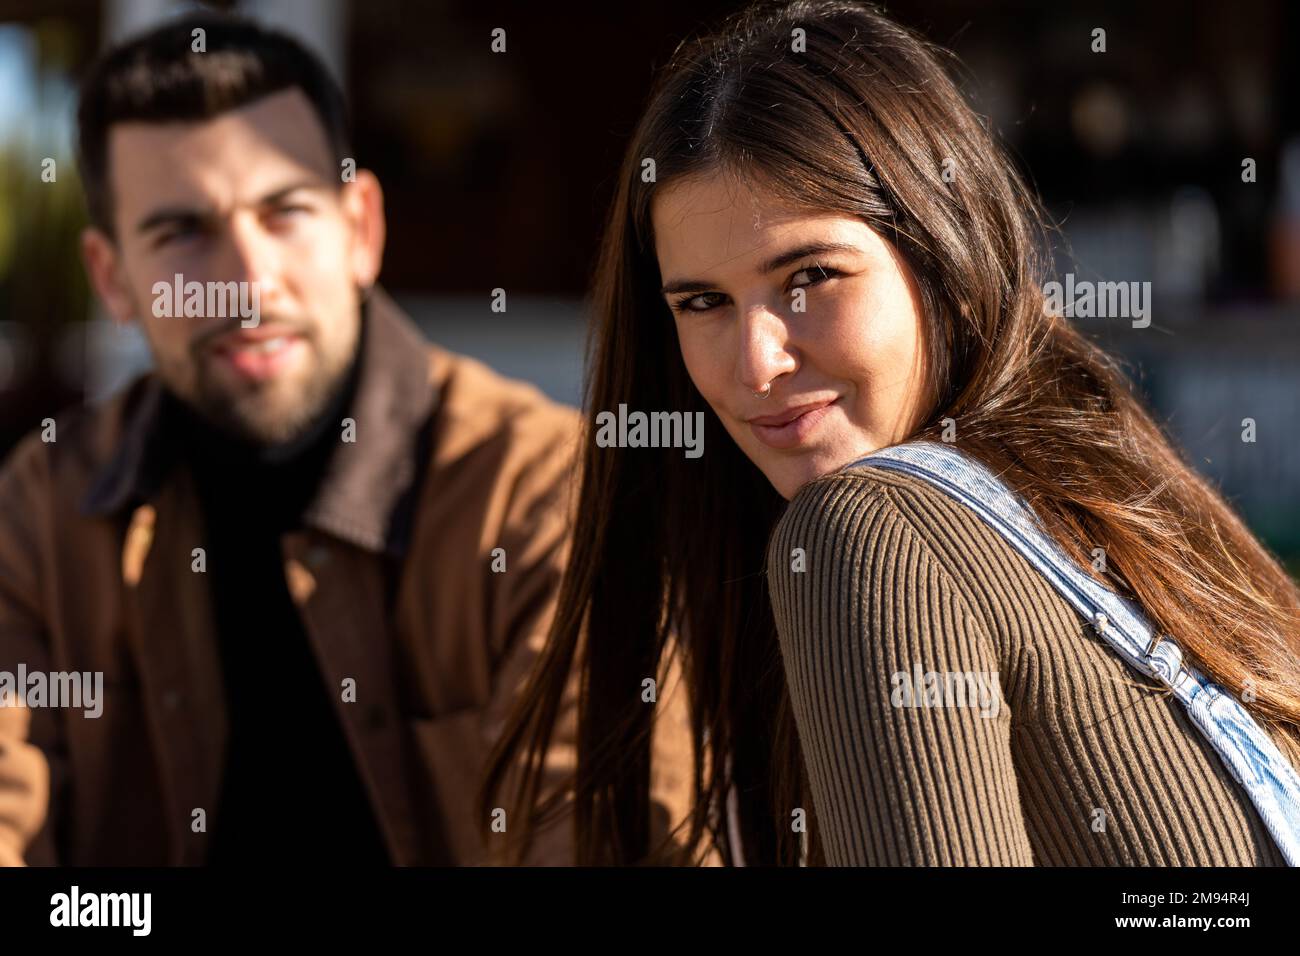 Positive young female in casual clothes with long dark hair looking at camera while sitting with male friend in outerwear on street Stock Photo